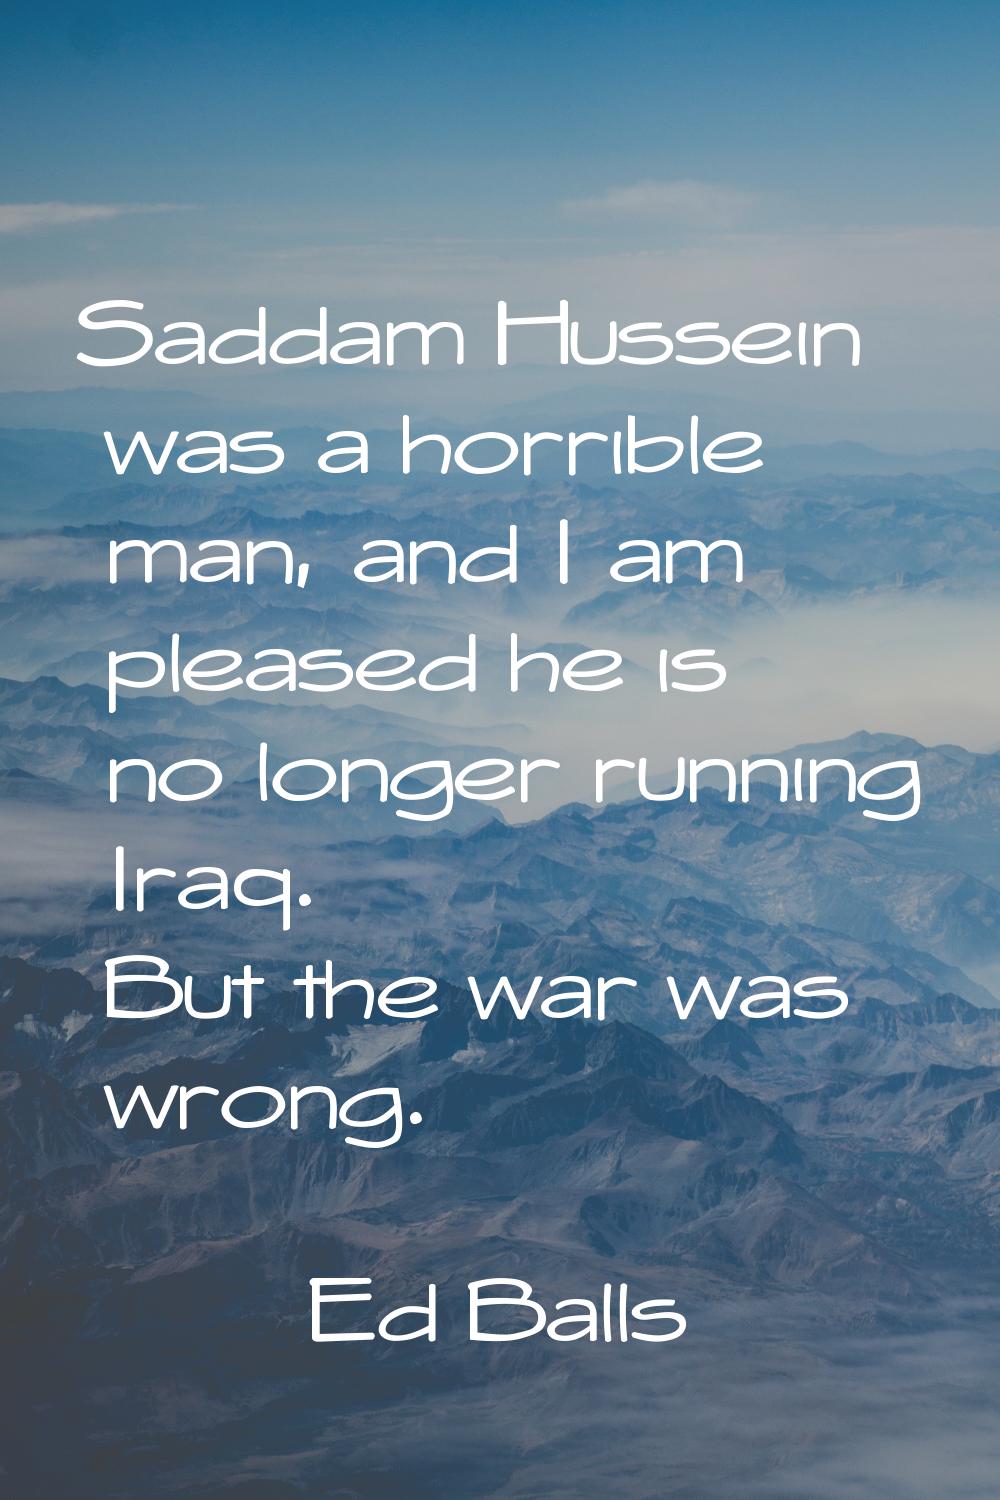 Saddam Hussein was a horrible man, and I am pleased he is no longer running Iraq. But the war was w